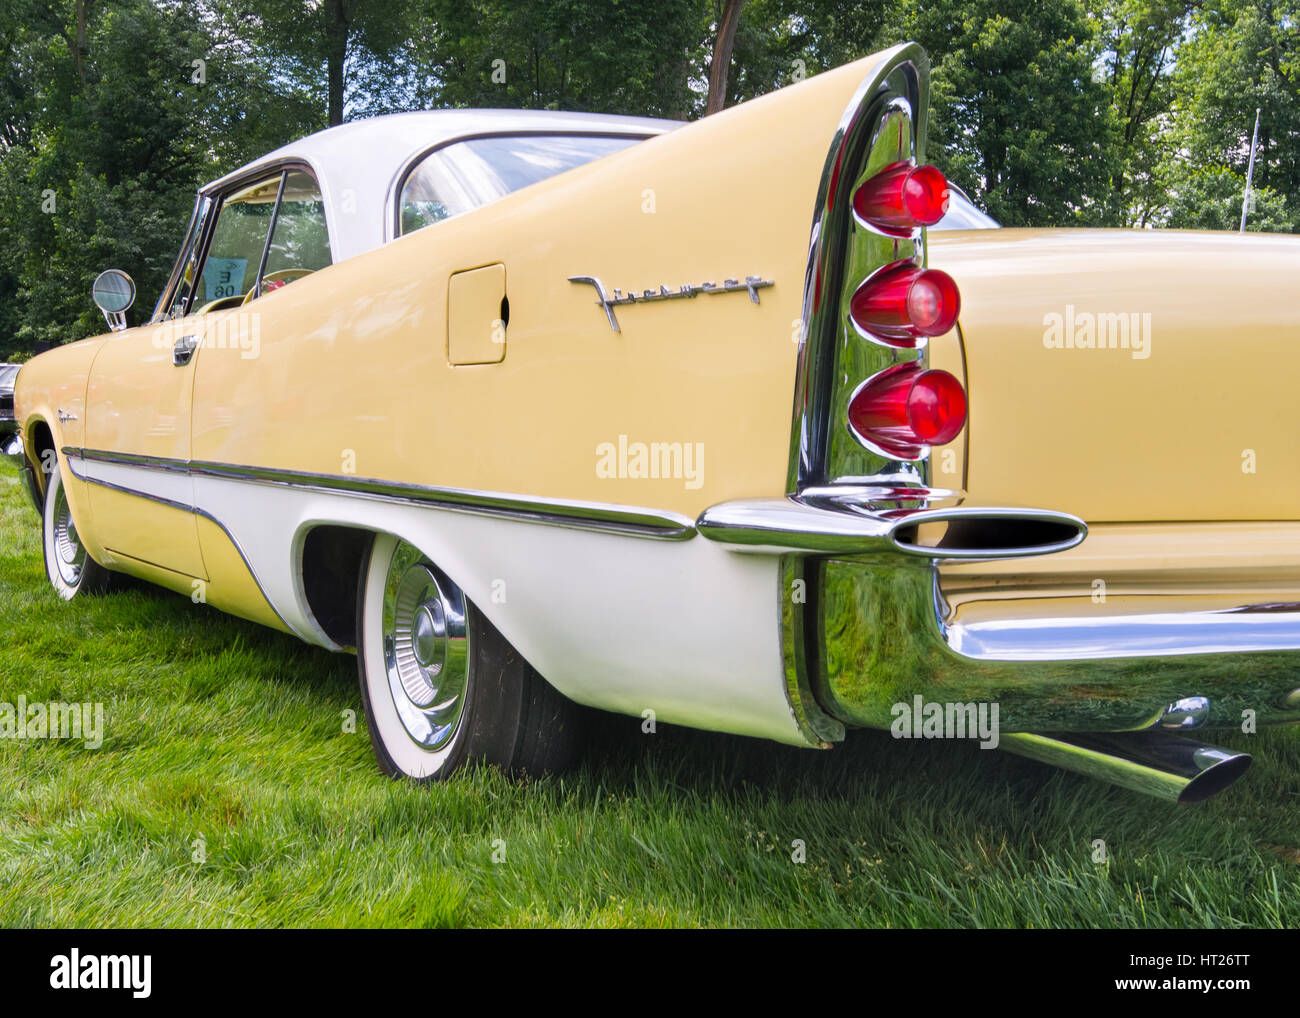 GROSSE POINTE SHORES, MI/USA - JUNE 16, 2013: A 1957 DeSoto Firesweep car at the EyesOn Design car show, held at the Edsel and Eleanor Ford House. Stock Photo